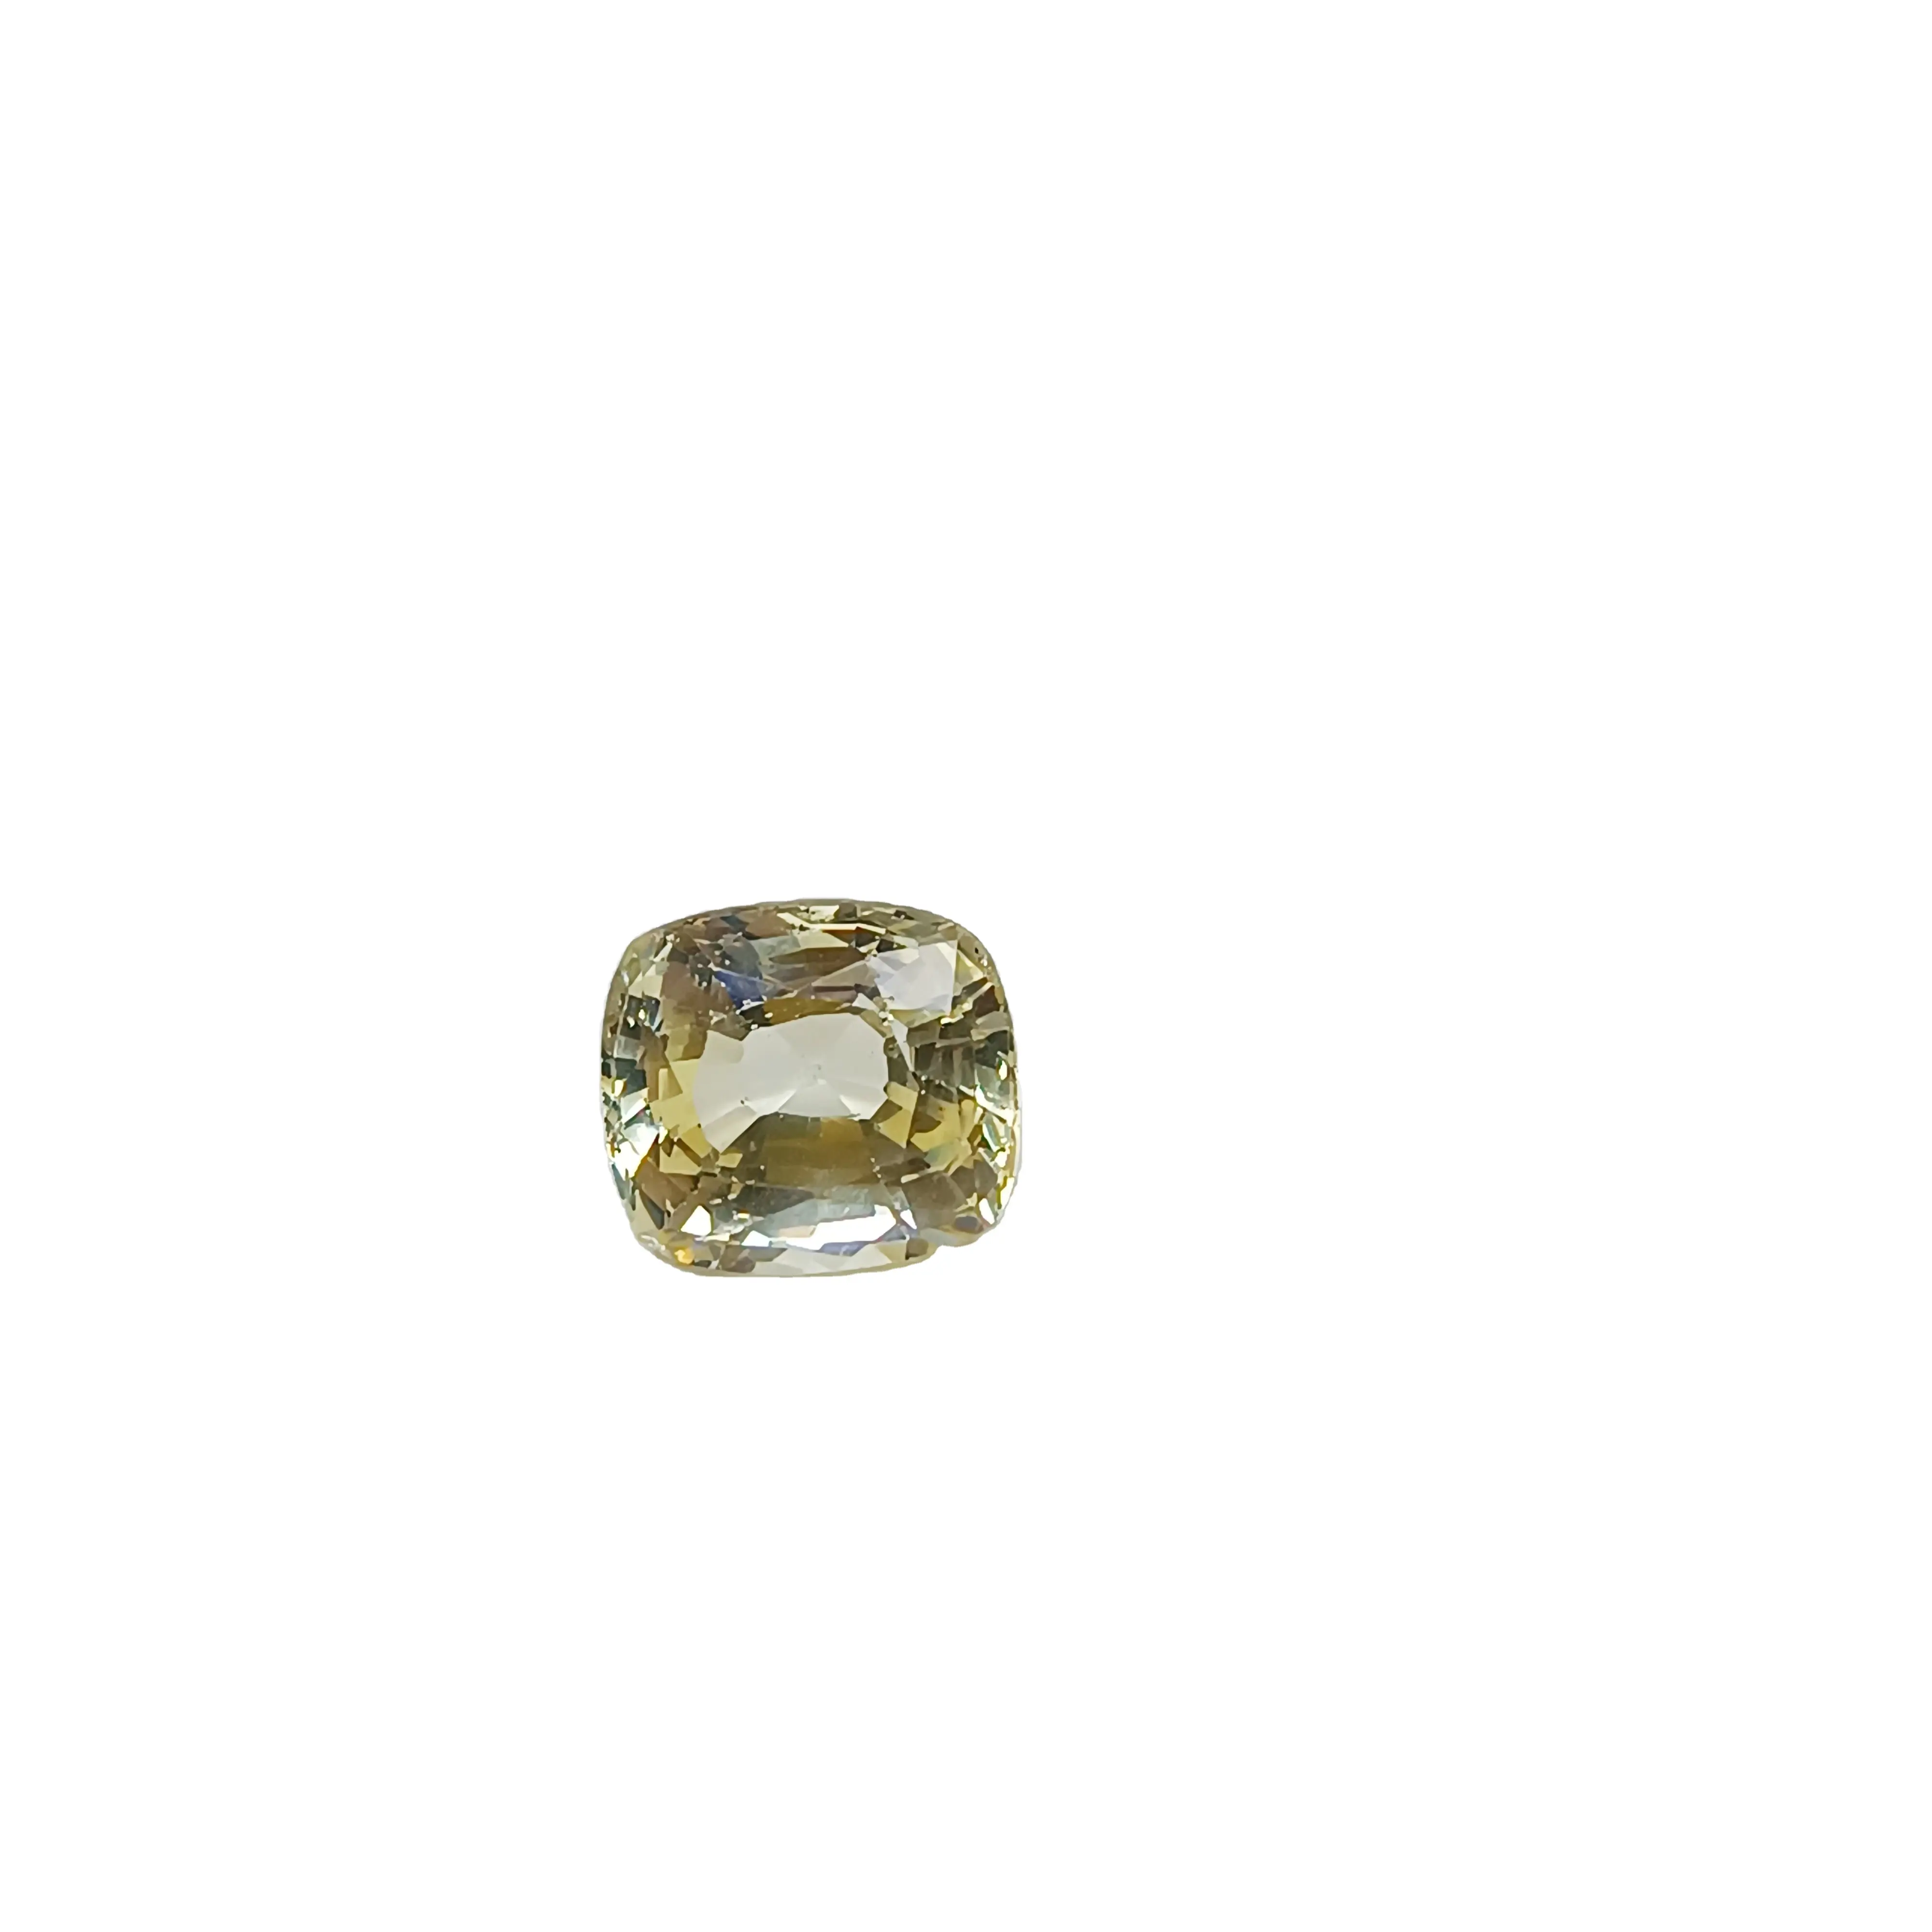 Hot Selling Precious Gemstone 7 Carat Yellow Sapphire Available from India for Worldwide Export